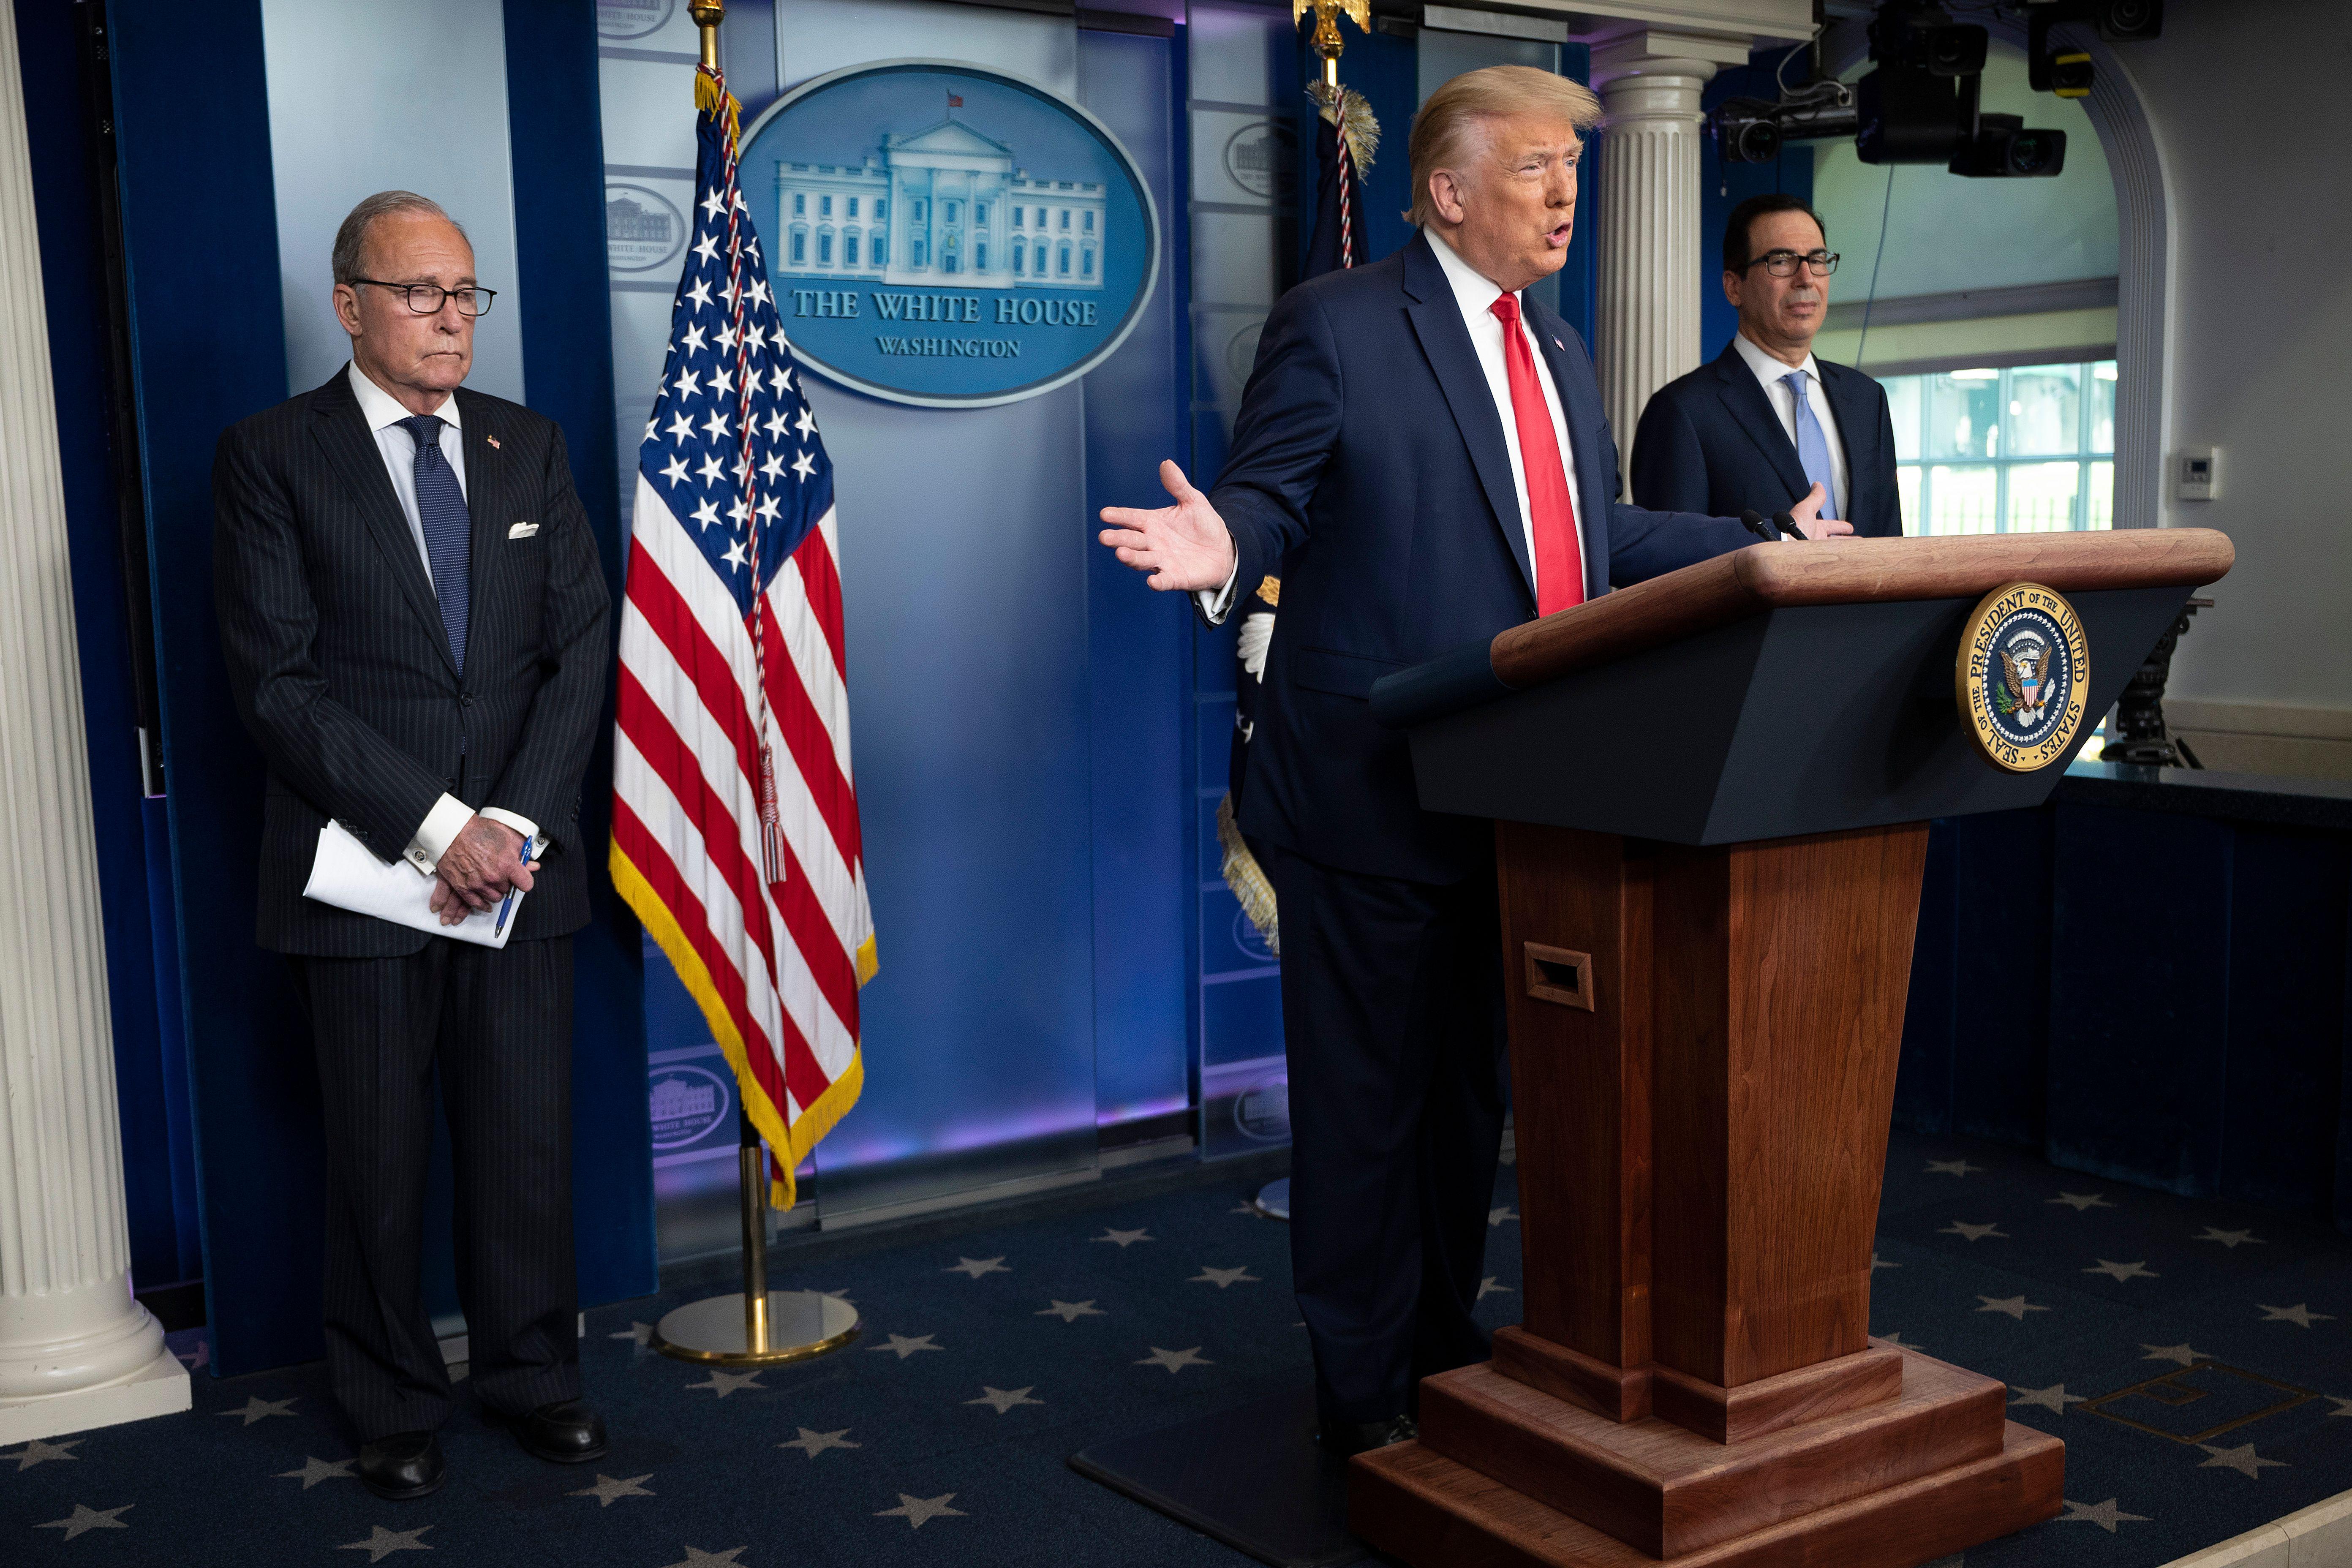 Donald Trump at the podium in the White House briefing room with his arms spread wide. Kudlow and Mnuchin stand at either side of him.